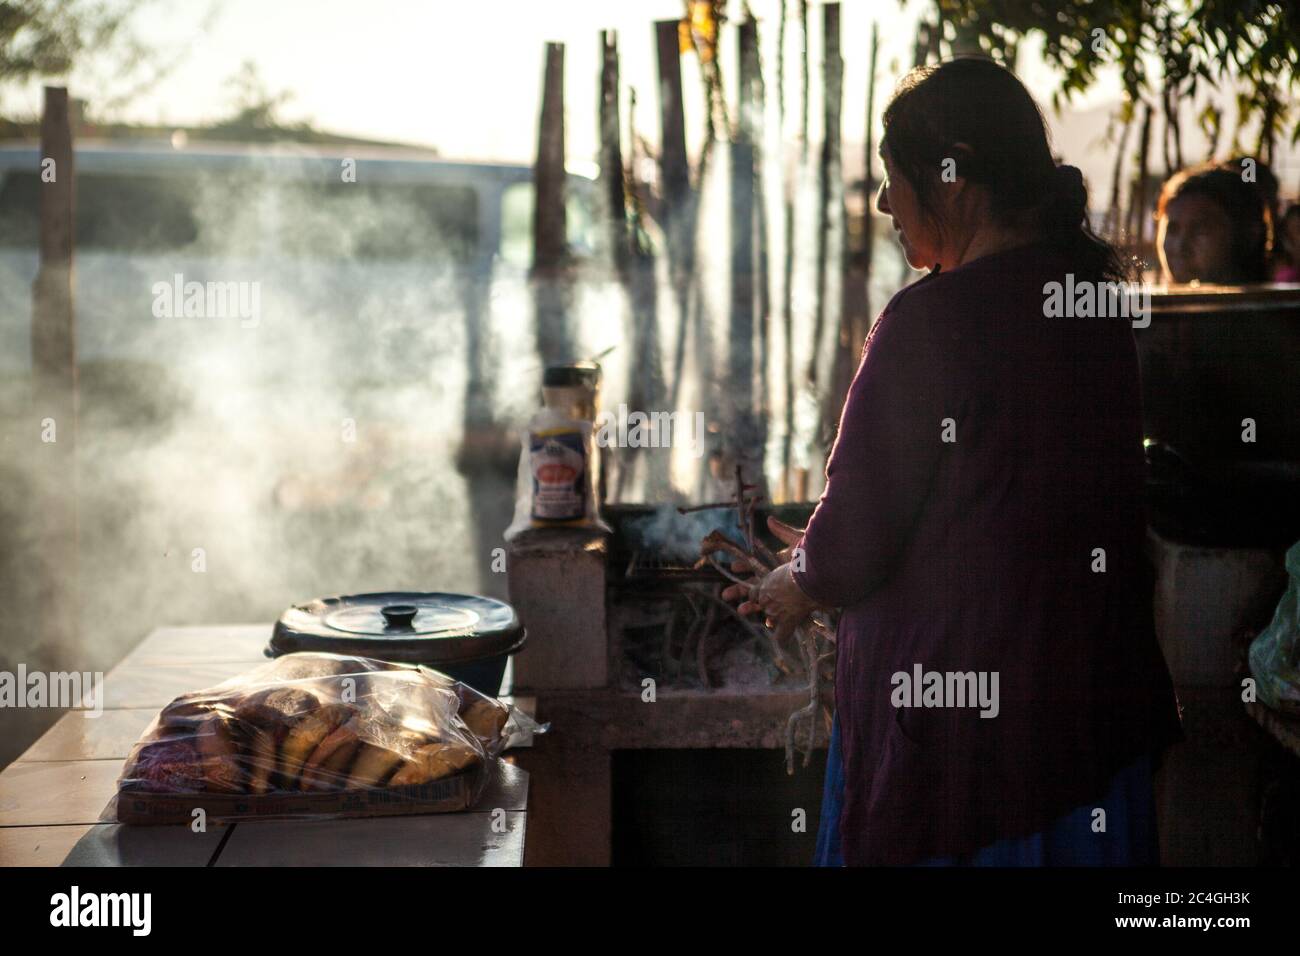 Punta Chueca, Mexico. 10th Dec, 2019. Women of the ComcÃac community prepare food for the event on a wood-burning stove.The ComcÃac or Seri tribe, as they are known by many, are located in Punta Chueca, Sonora desert, by the northern pacific coast of Mexico. The ComcÃac indigenous community has a strong female presence within their culture. They are the principal organisers, promoters and those who are celebrated during the rituals and traditions of the community. This could not be clearer, than during one of the most important rituals of the community, the ceremony of puberty. This celebr Stock Photo